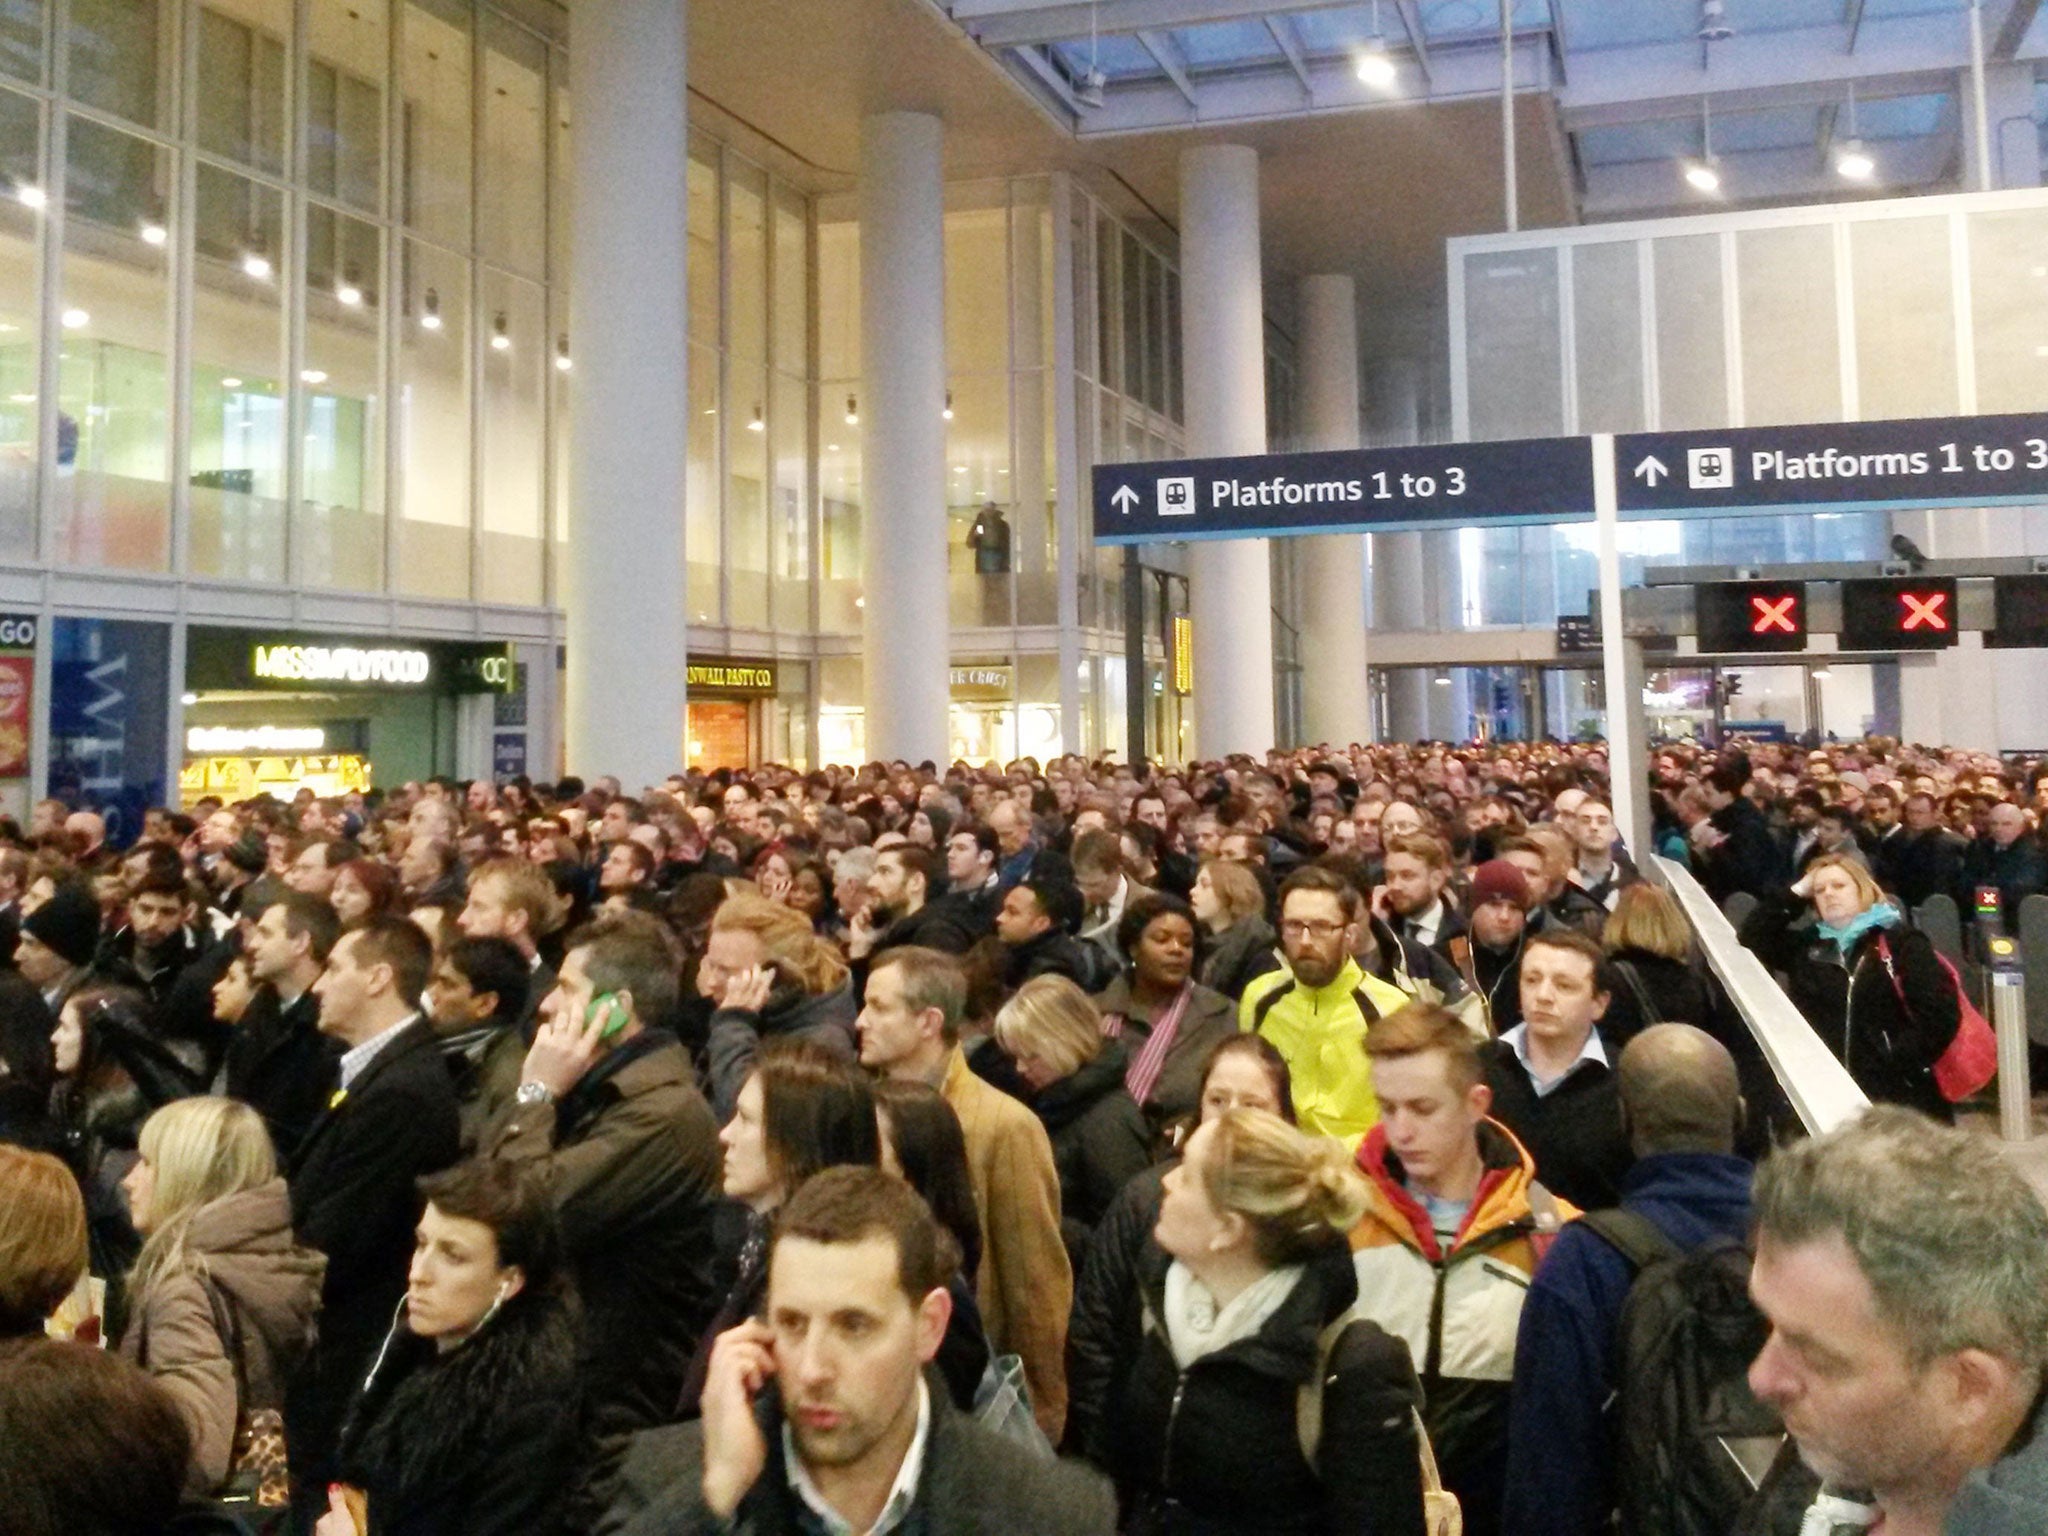 Passengers at London Bridge station were forced to jump barriers because of overcrowding